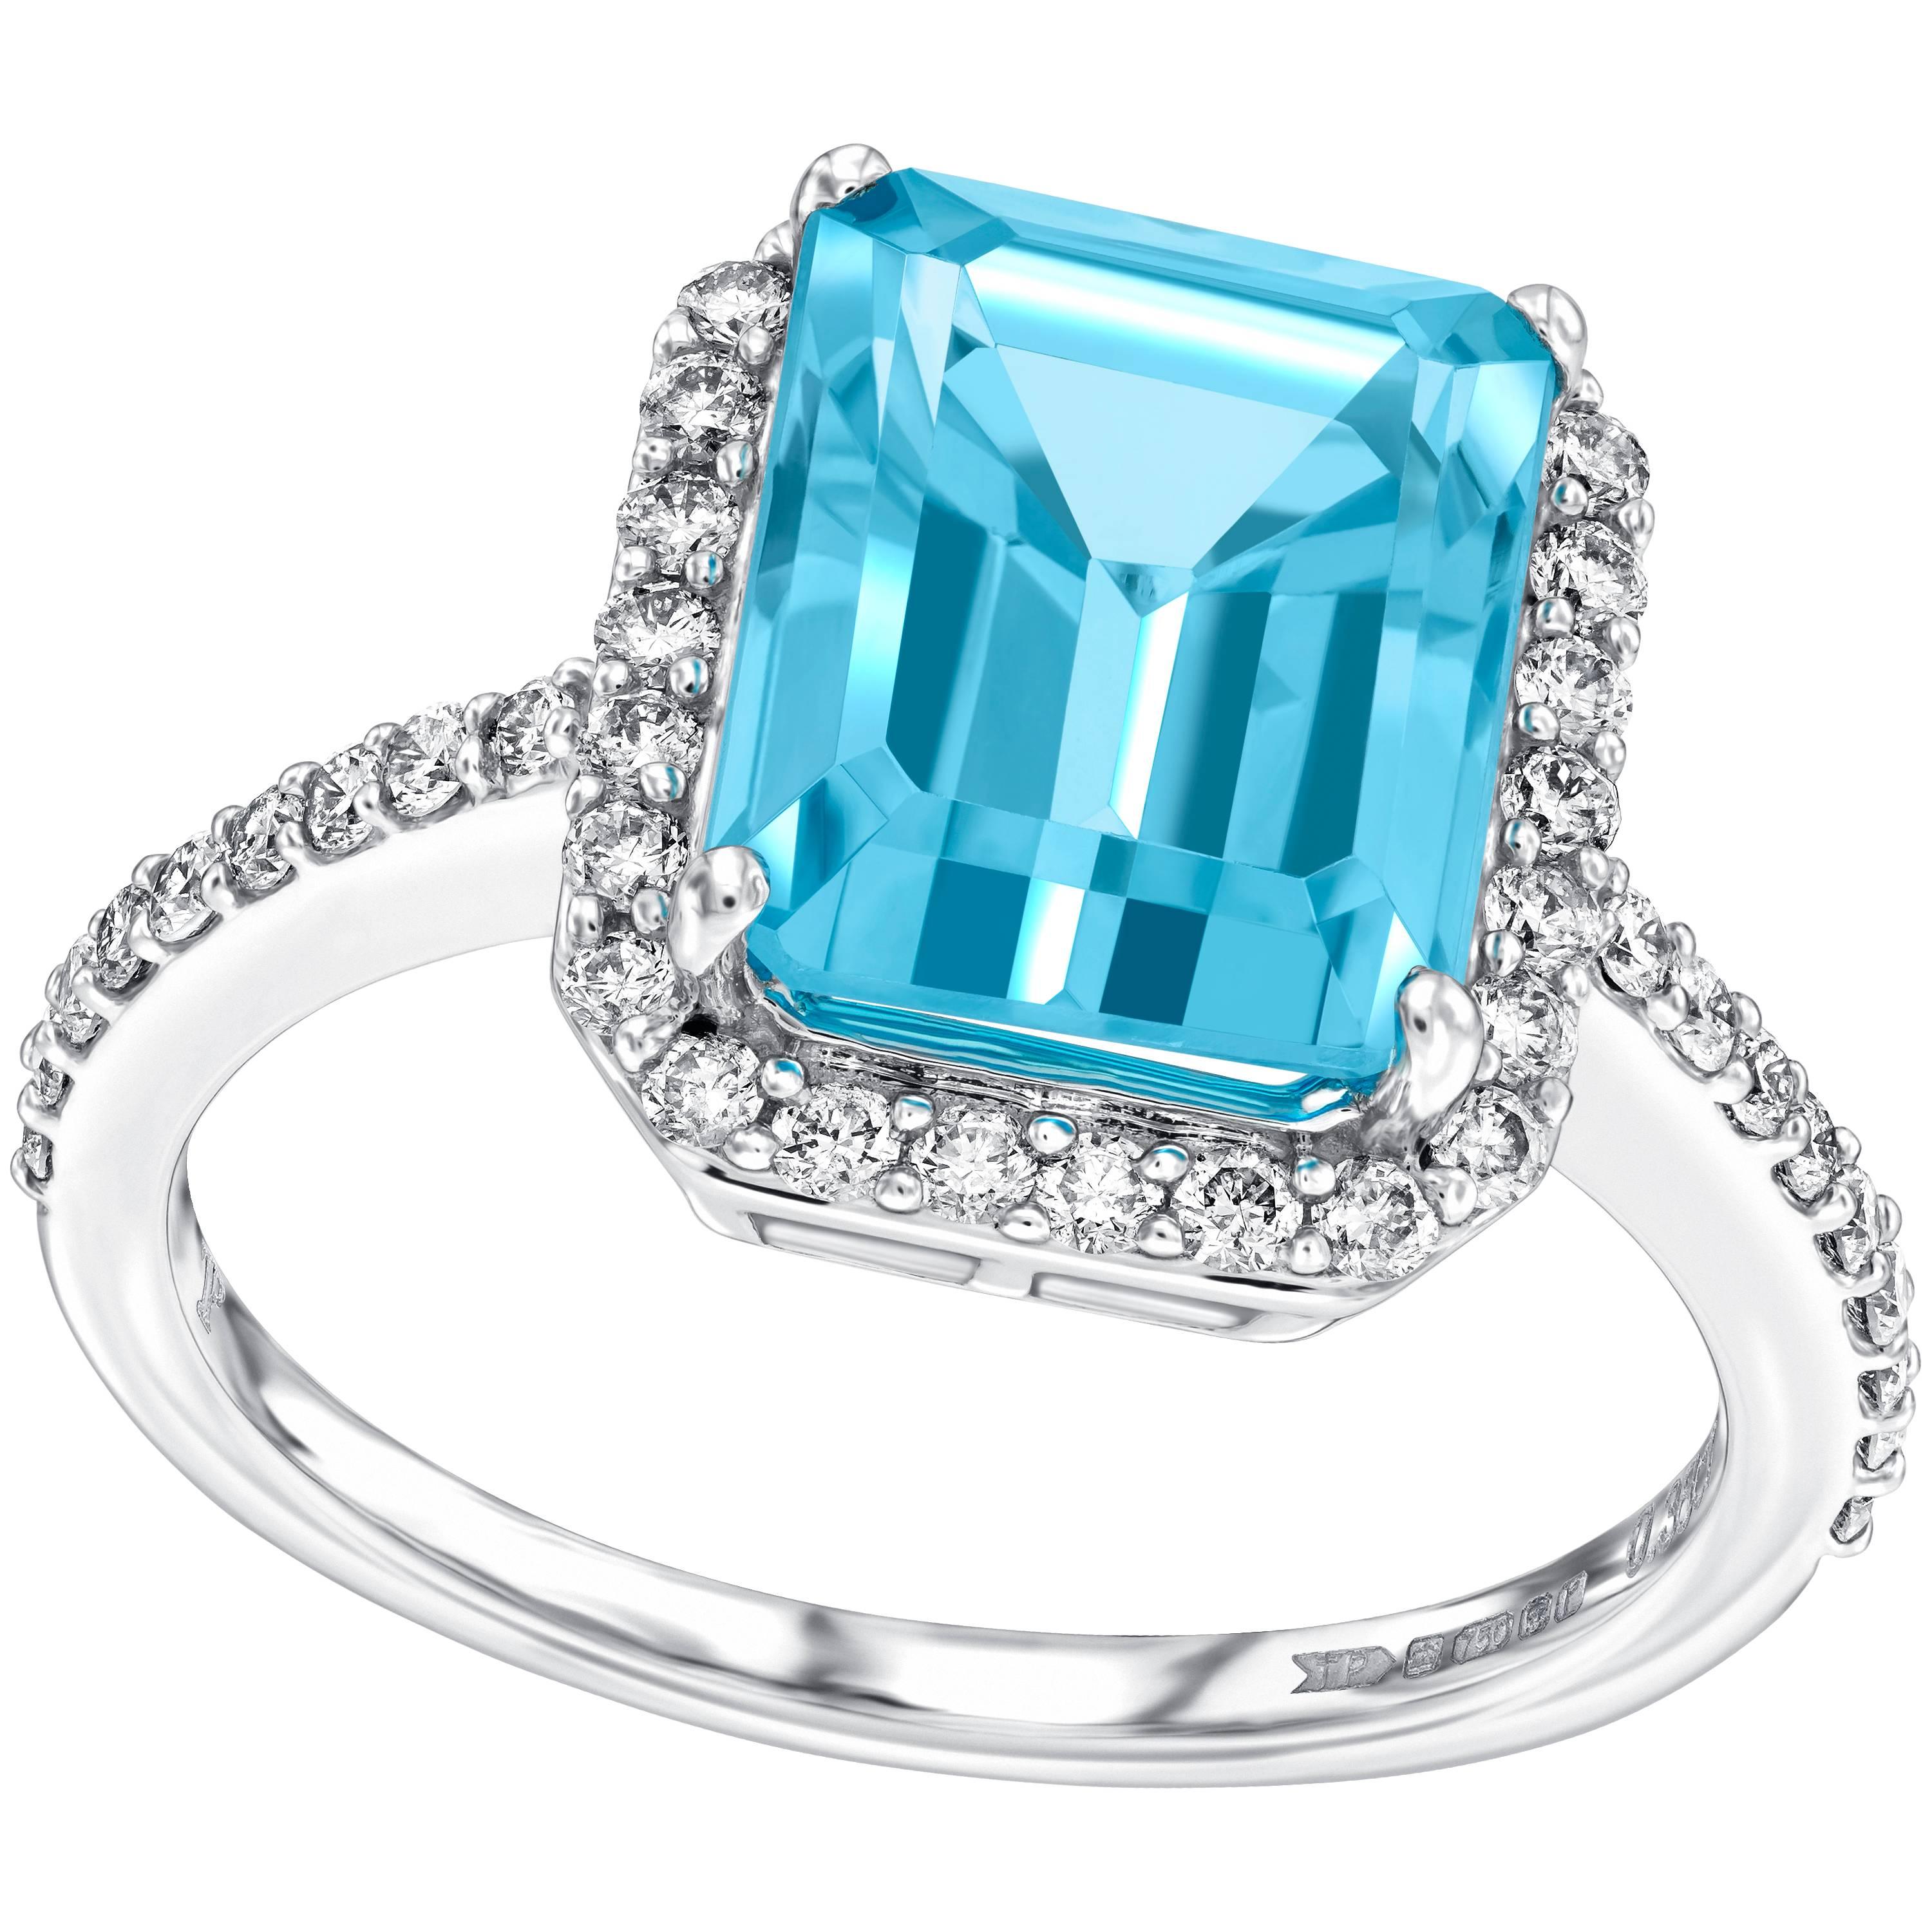 This beautiful 5.00 Carat emerald cut blue topaz engagement ring with surrounded by a pave set 0.38ct white round brilliant diamond halo. This ring has a total gem weight of 5.38ct. With a quality grading of H-SI, the weight of the ring is 4.6